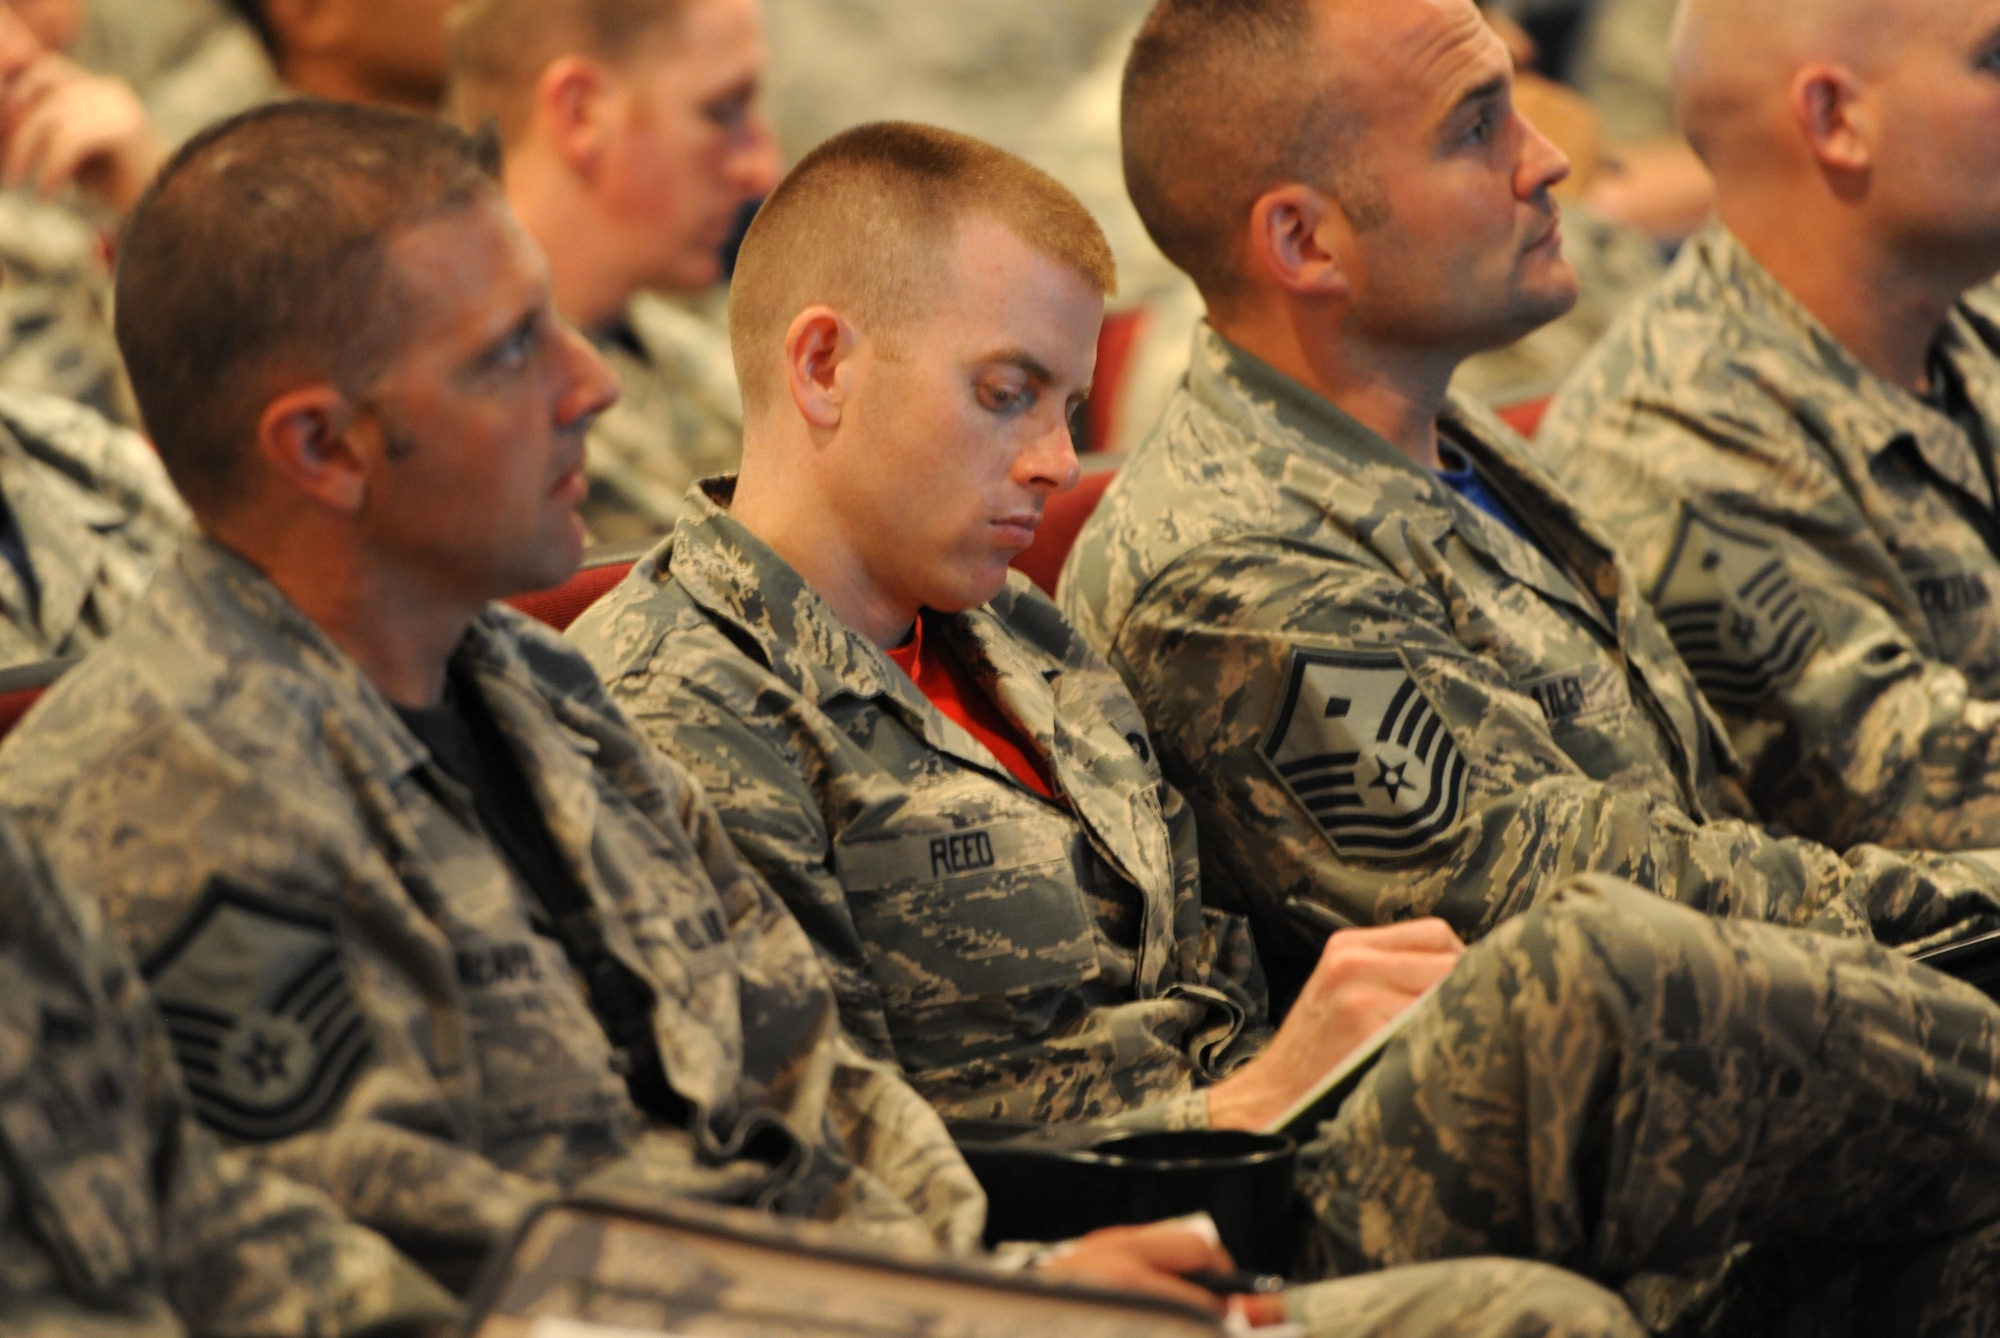 Master Sgt. Jeremy Reed, 509th Logistics Readiness Squadron first sergeant, takes notes during a briefing June 26, 2015, at Whiteman Air Force Base, Mo. The briefing discussed upcoming changes in the Enlisted Evaluation System and Weighted Airman Promotion System. (U.S. Air Force photo by Airman 1st Class Michaela R. Slanchik/Released)